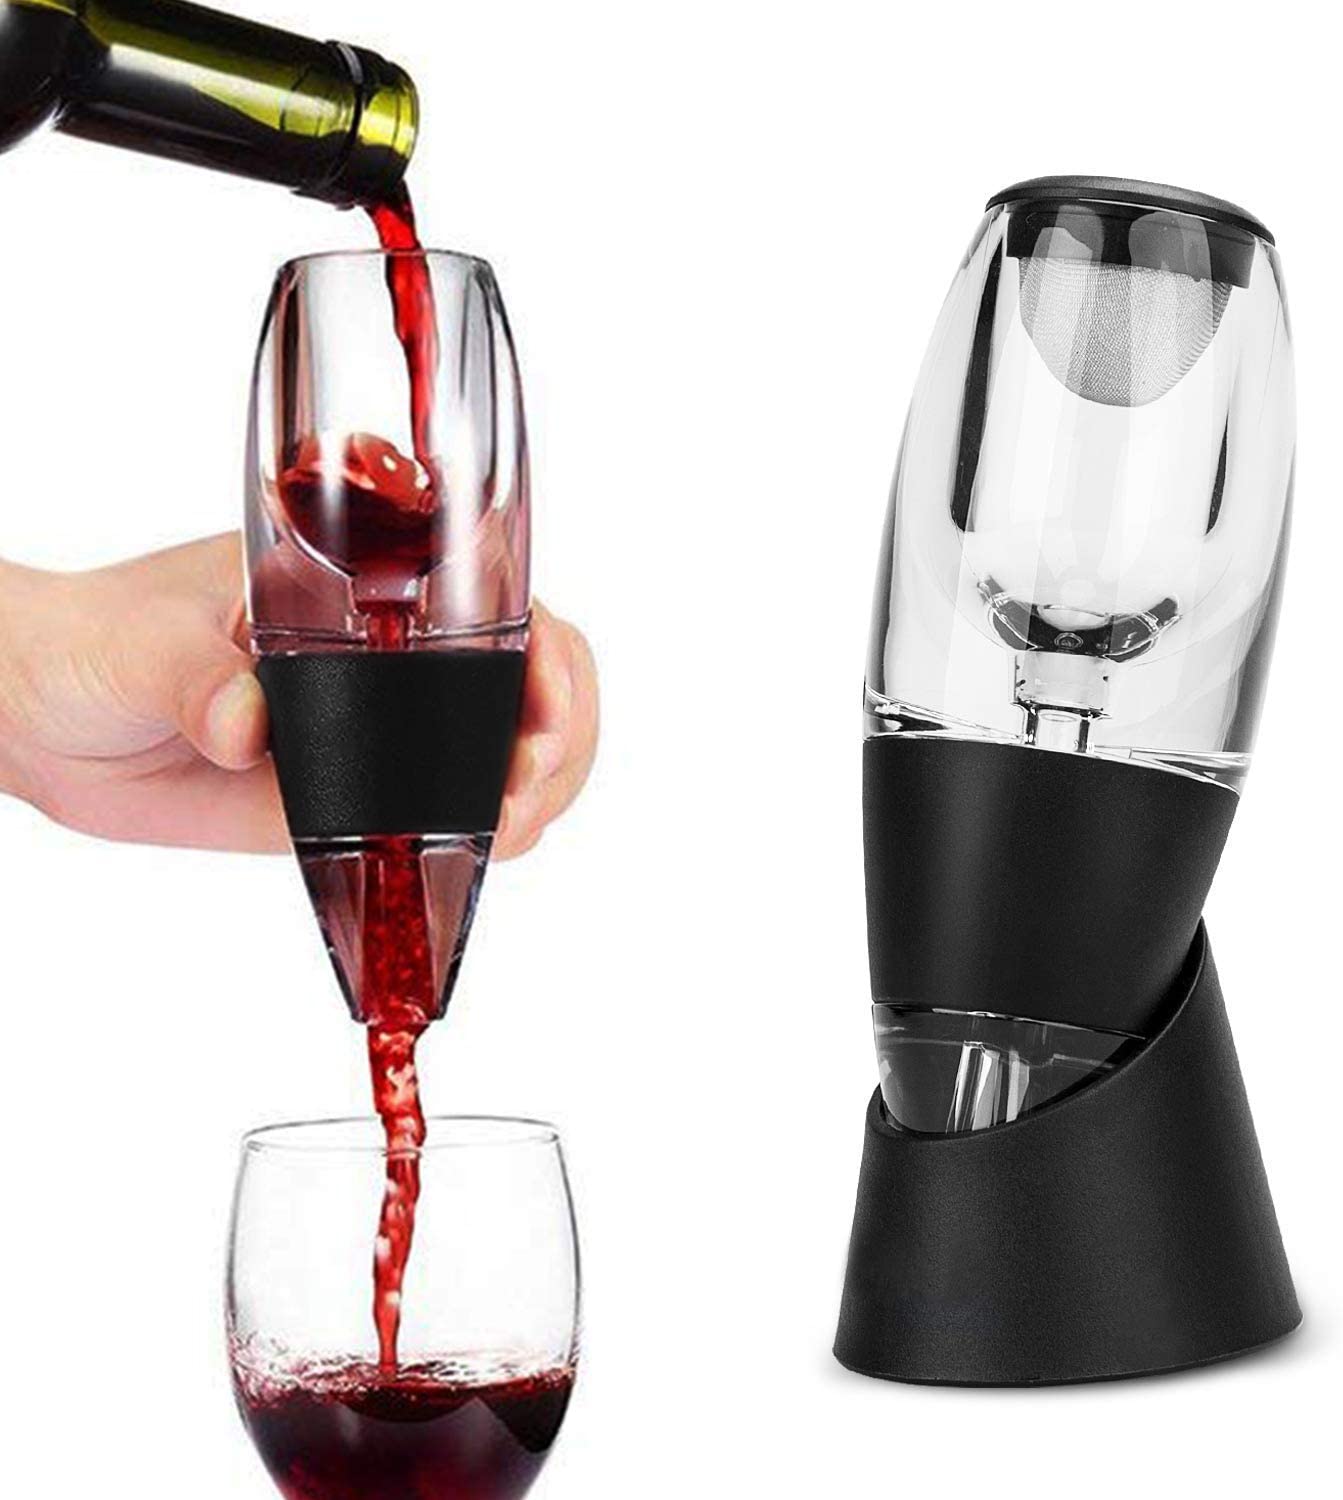 Ozoffer RED Wine Aerator and Sediment Filter Decanter Box Set